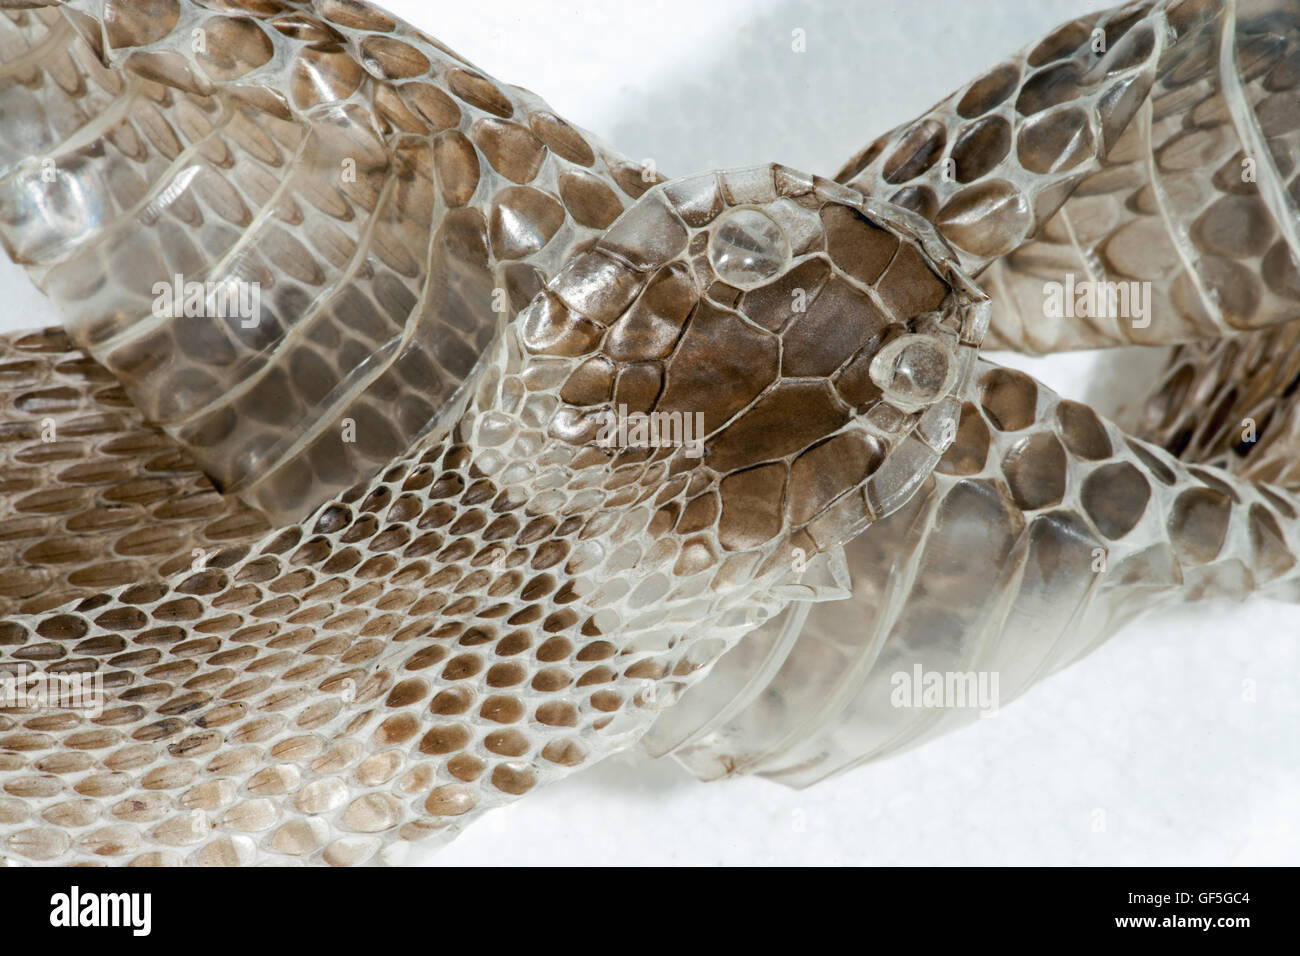 Grass Snake (Natrix natrix helvetica). Section sloughed skin. Head end eye scales and light coloured collar behind when on snake Stock Photo